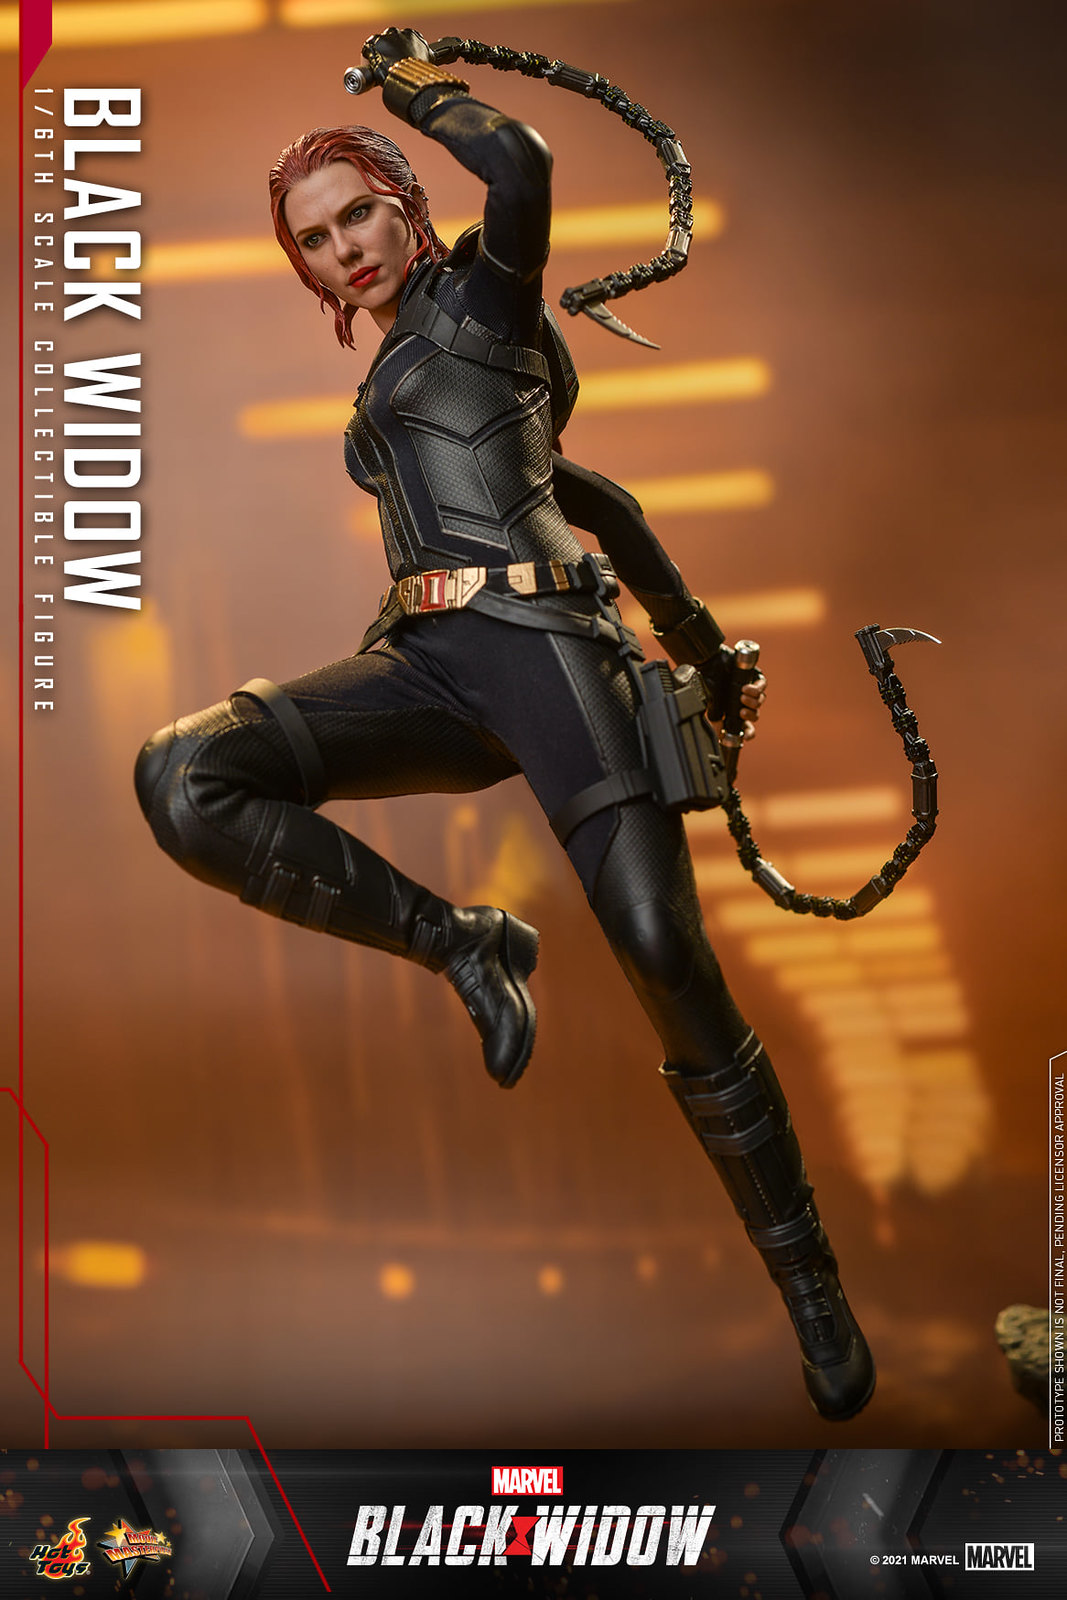 NEW PRODUCT: Hot Toys Black Widow - 1/6th scale Black Widow Collectible Figure 51312000369_5f69281181_h